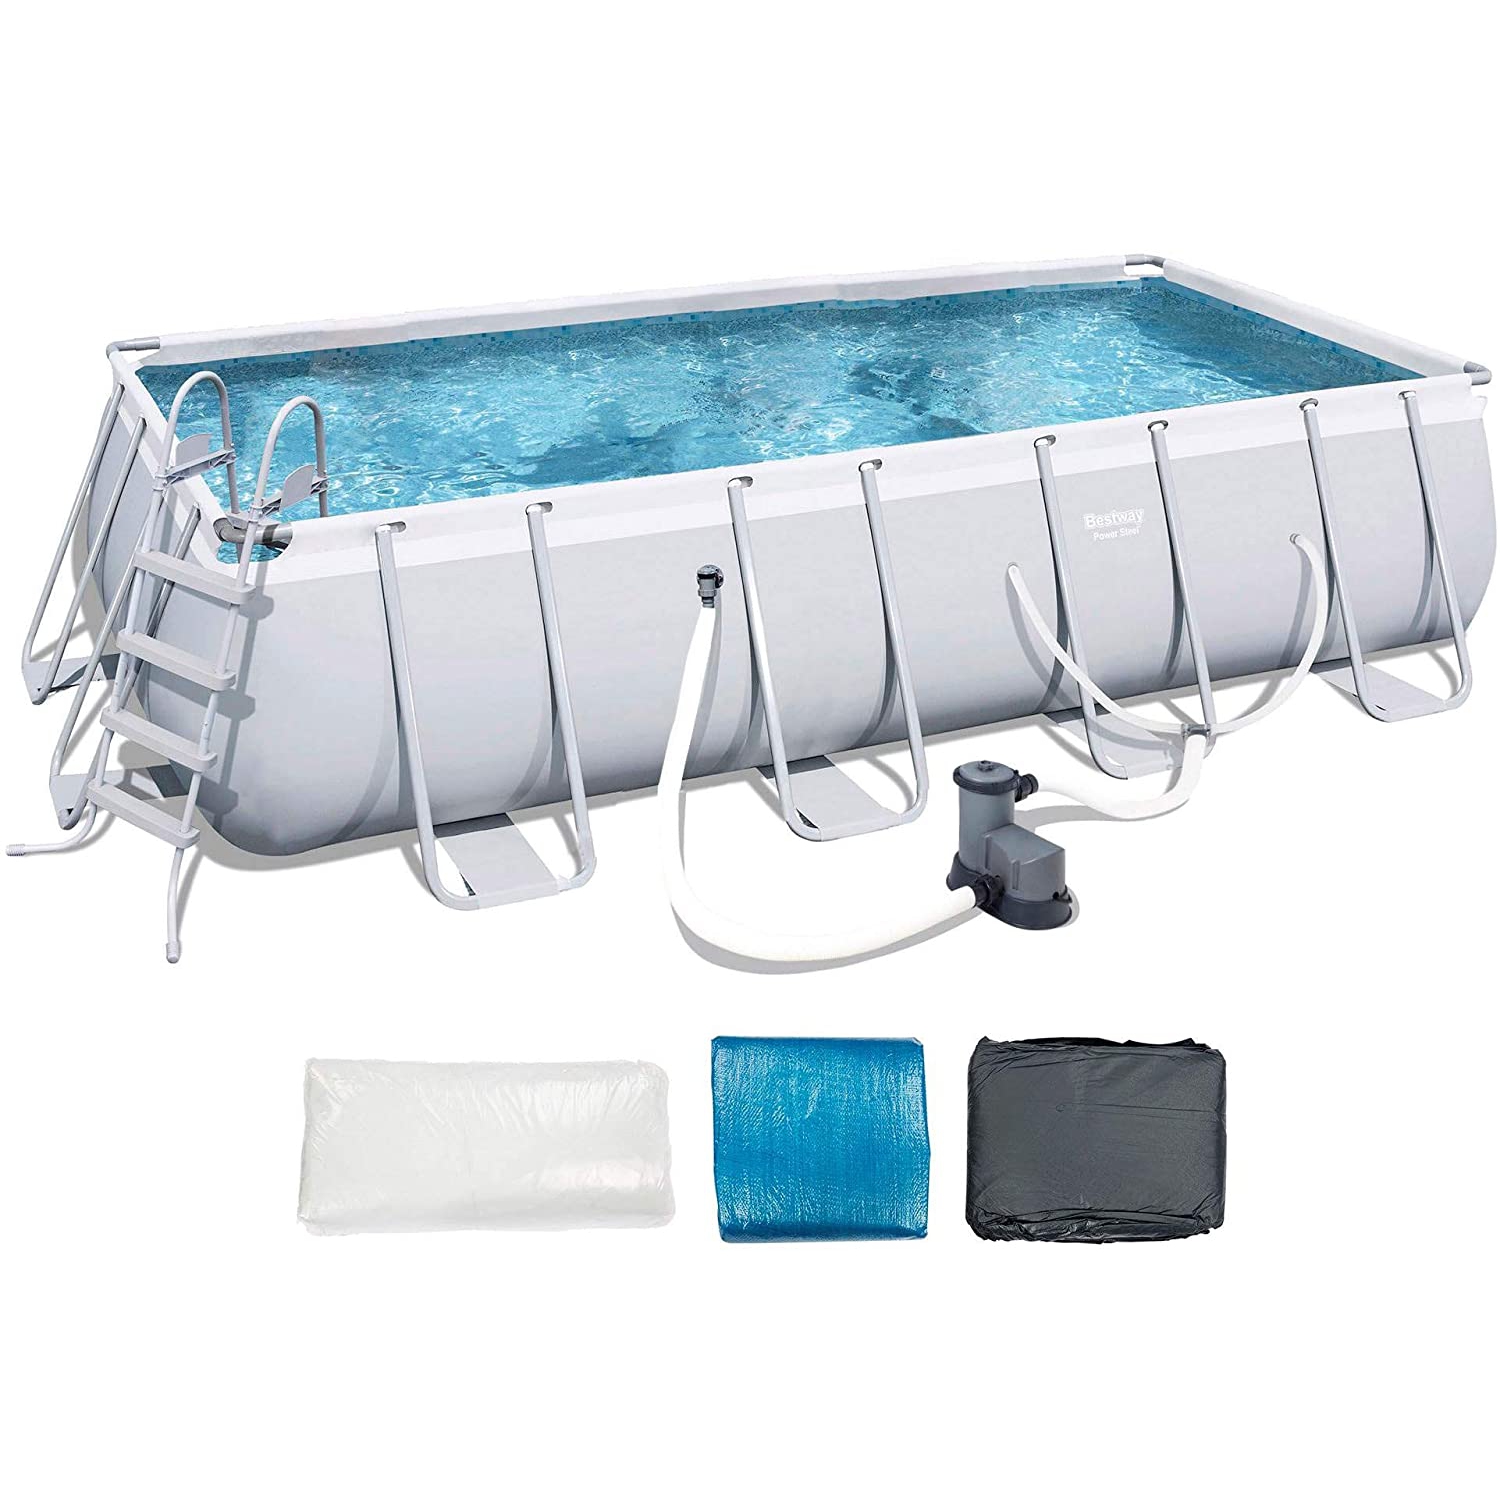 Bestway Power Steel 18' x 9' x 48" Rectangular Frame Pool Set.Extra strength side walls heavy duty built designed to provide fun in the sun for many years.